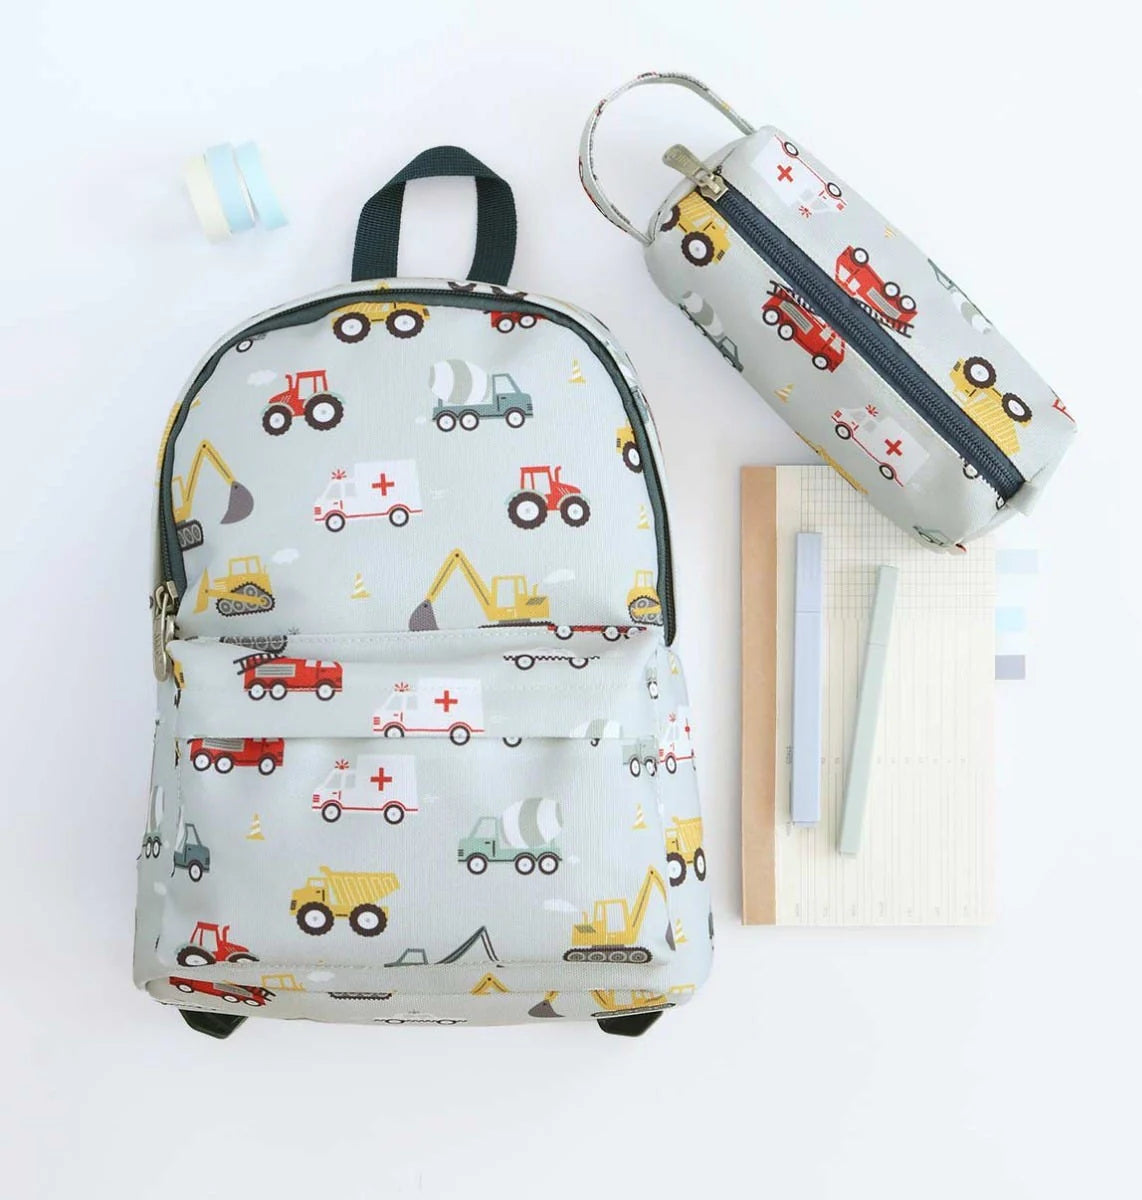 A LITTLE LOVELY COMPANY - Little backpack - Vehicles